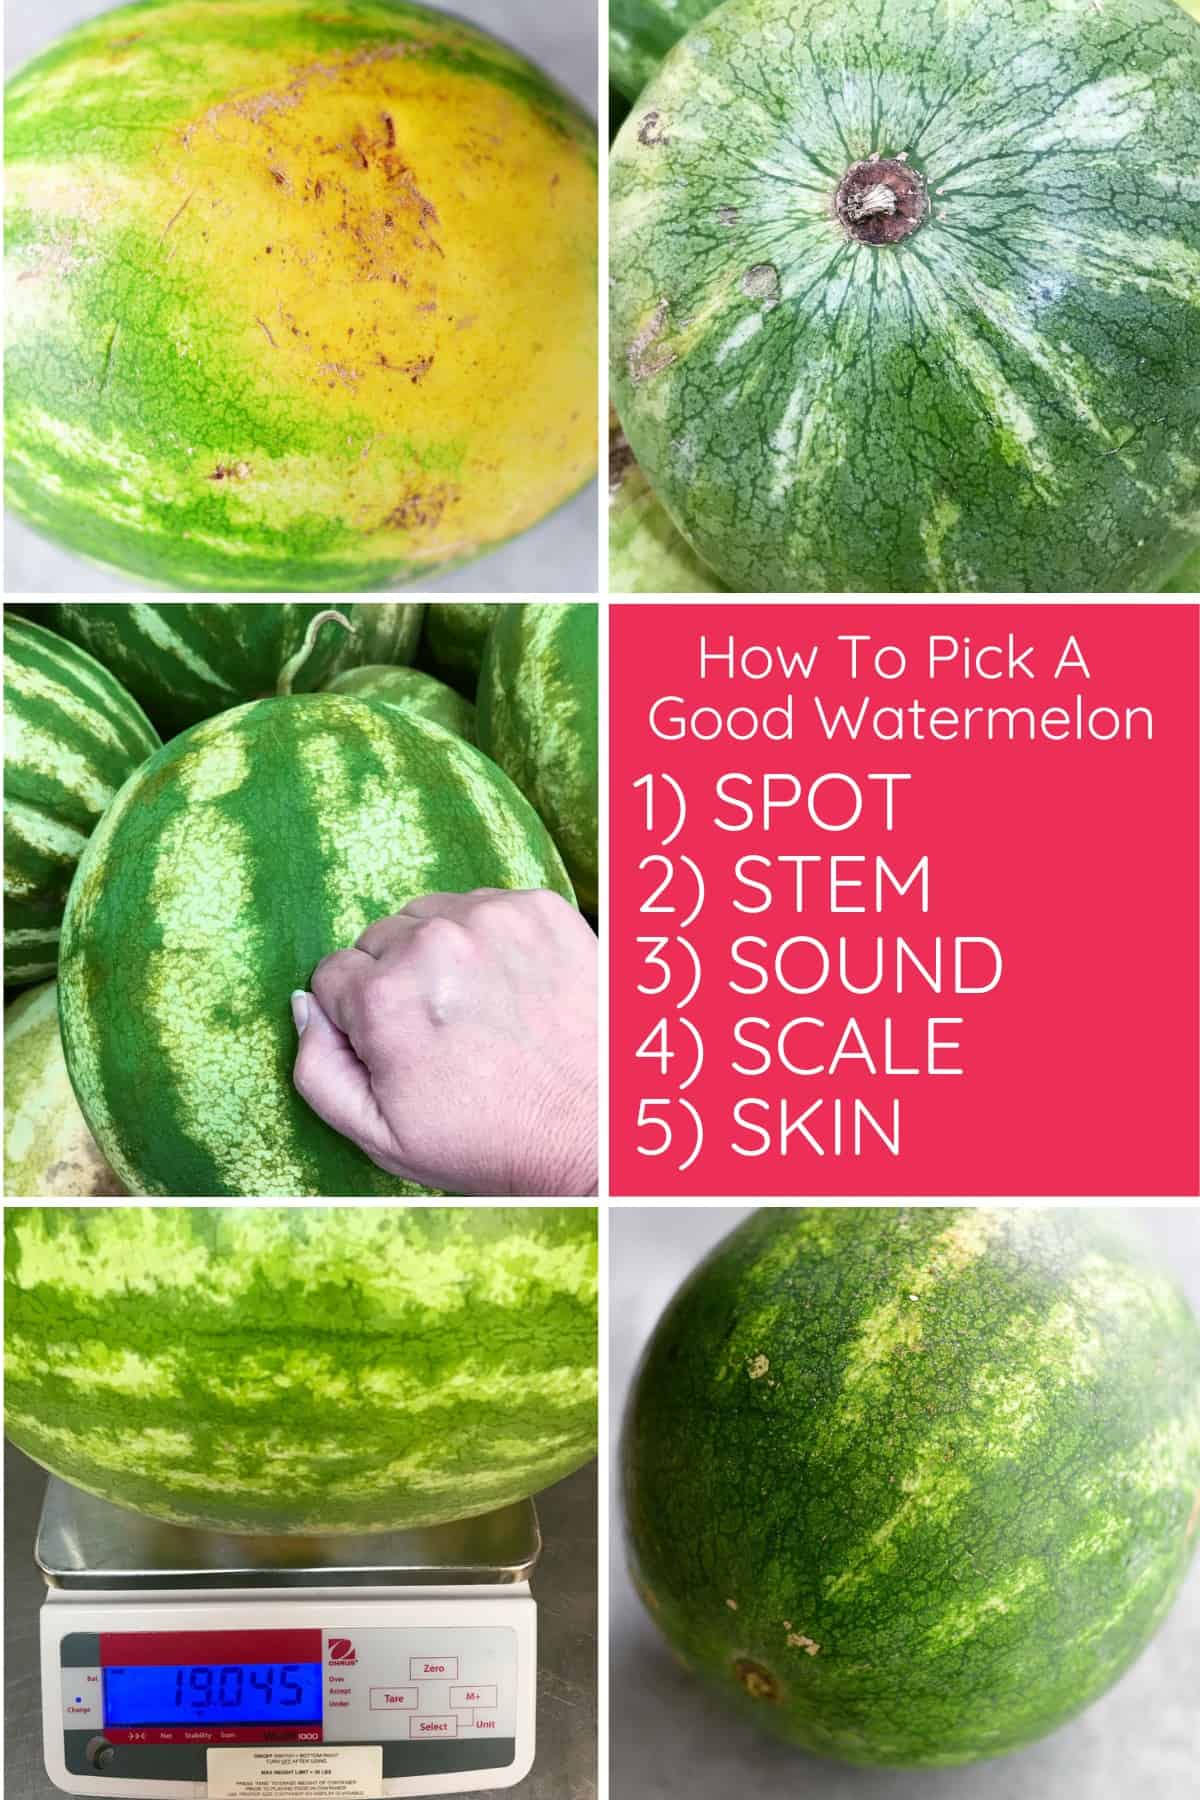 How to pick a good watermelon collage.